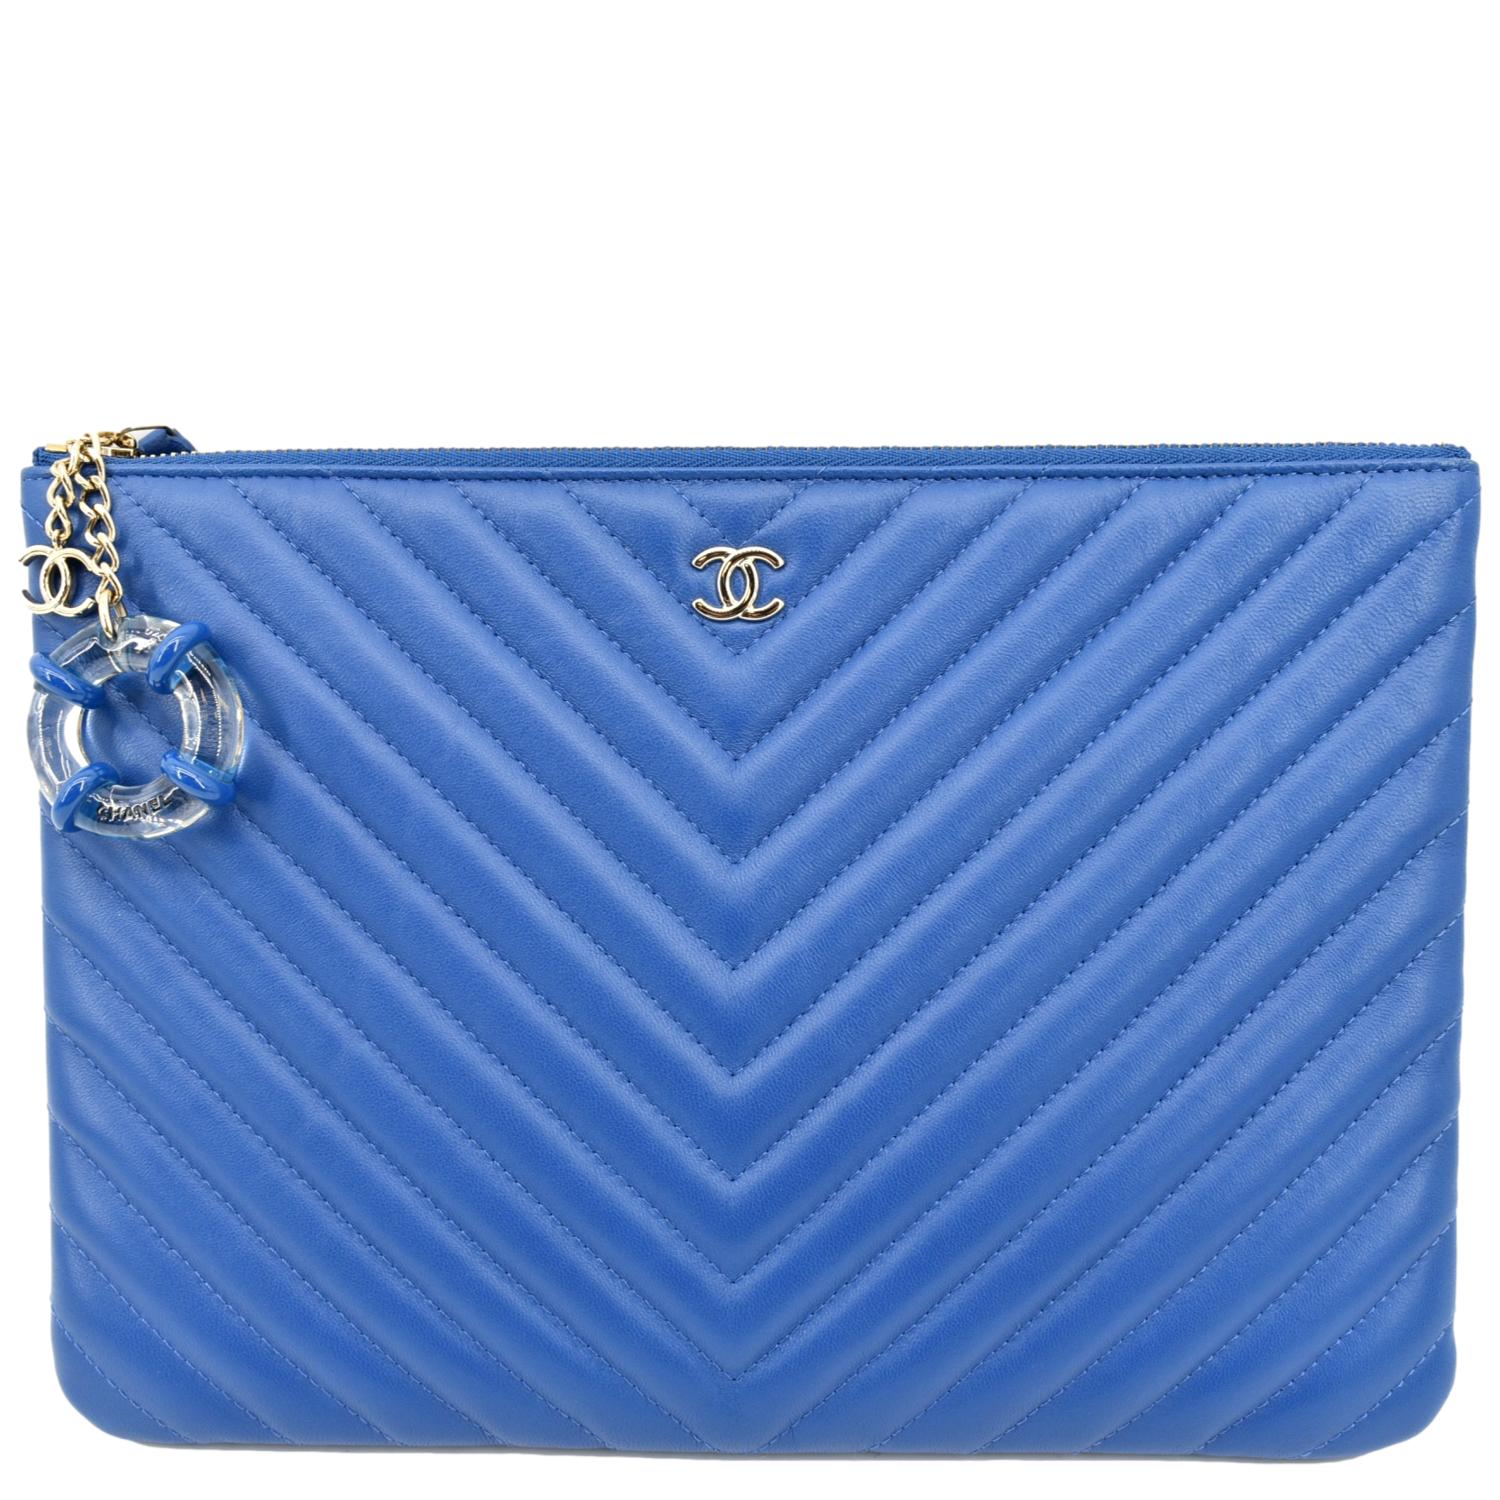 Chanel Maxi Flap Bag Blue Lambskin Leather  Silver Hardware  Baghunter